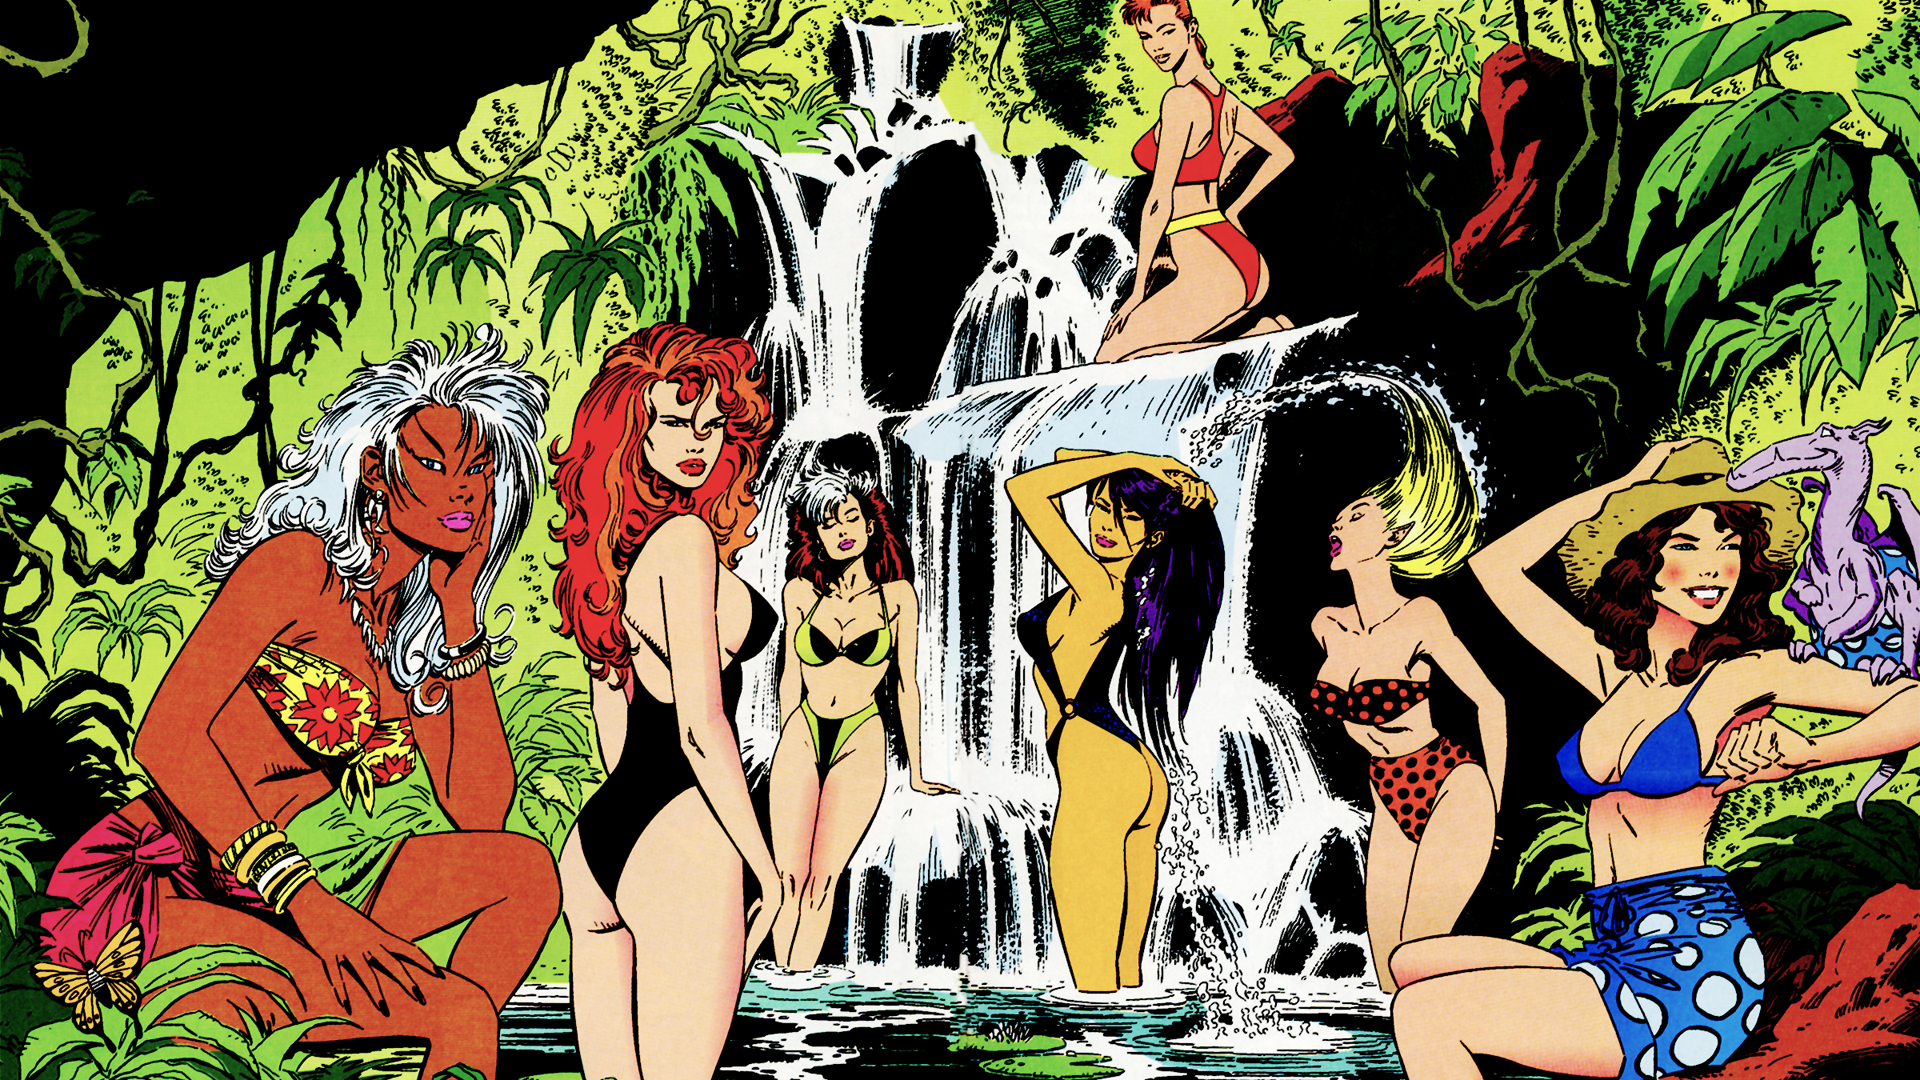 Comics Marvel swimsuit special HD Wallpaper Background Image.